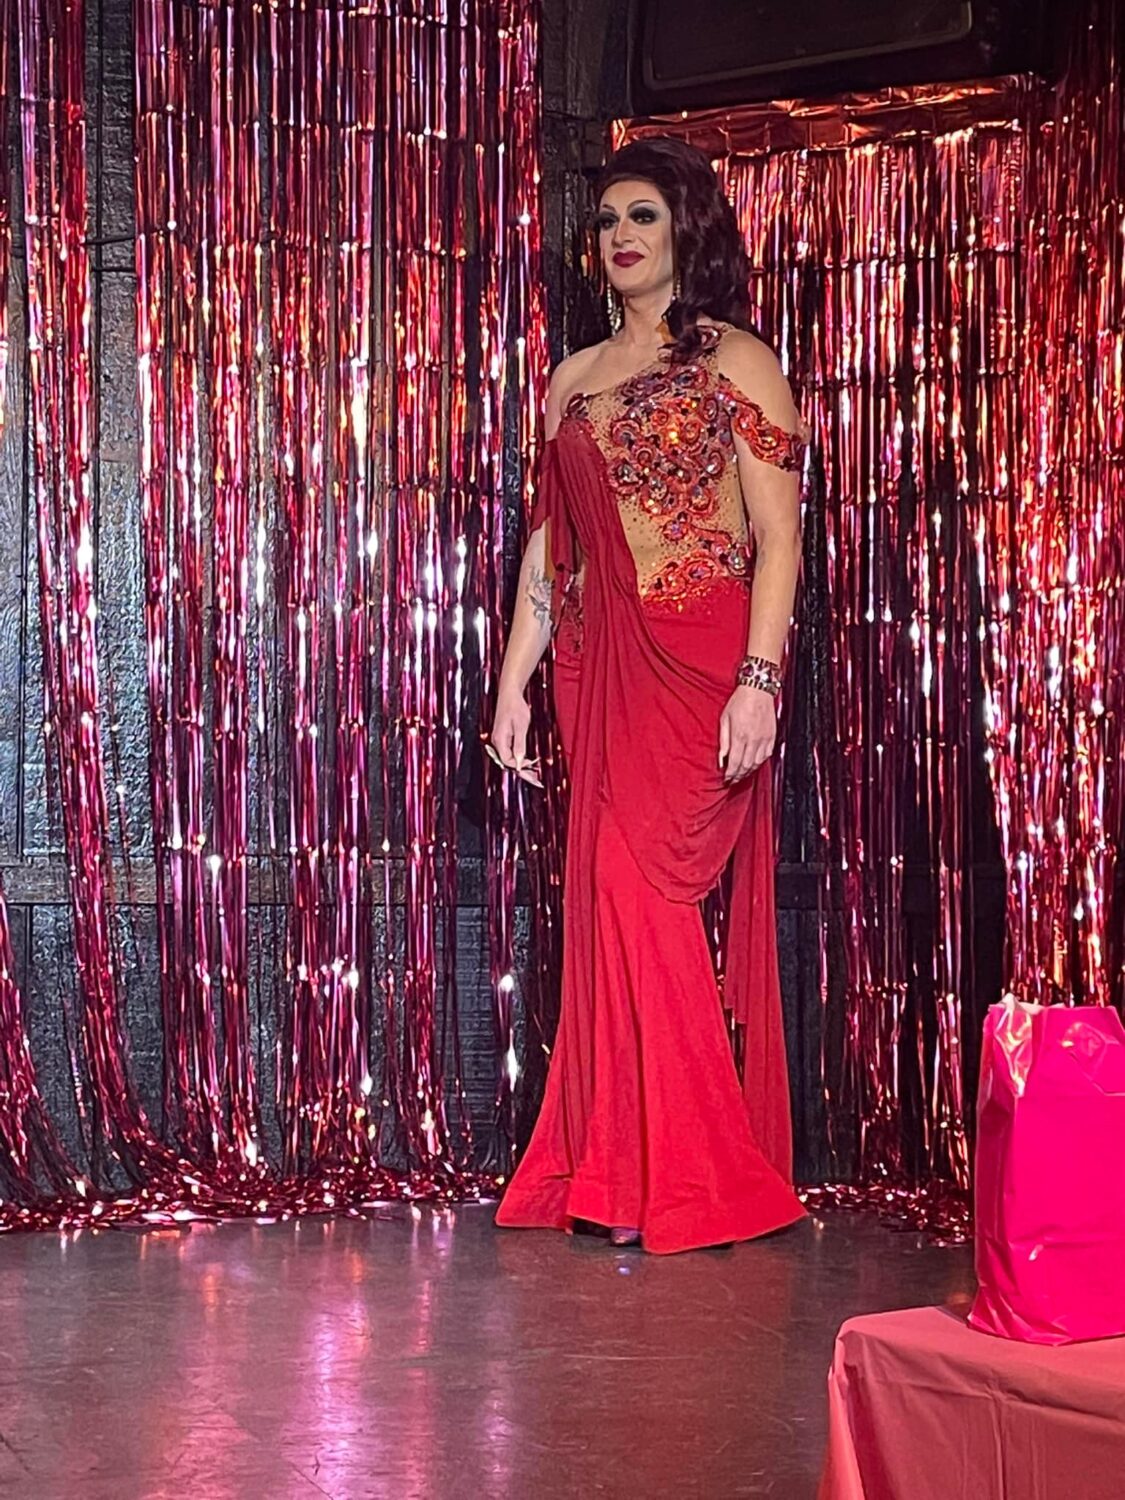 Anaslaysia Annejob in Evening Gown Category | Miss Southbend Pageant | Southbend Tavern (Columbus, Ohio) | 1/30/2022 [Photo by Vintage Blue]